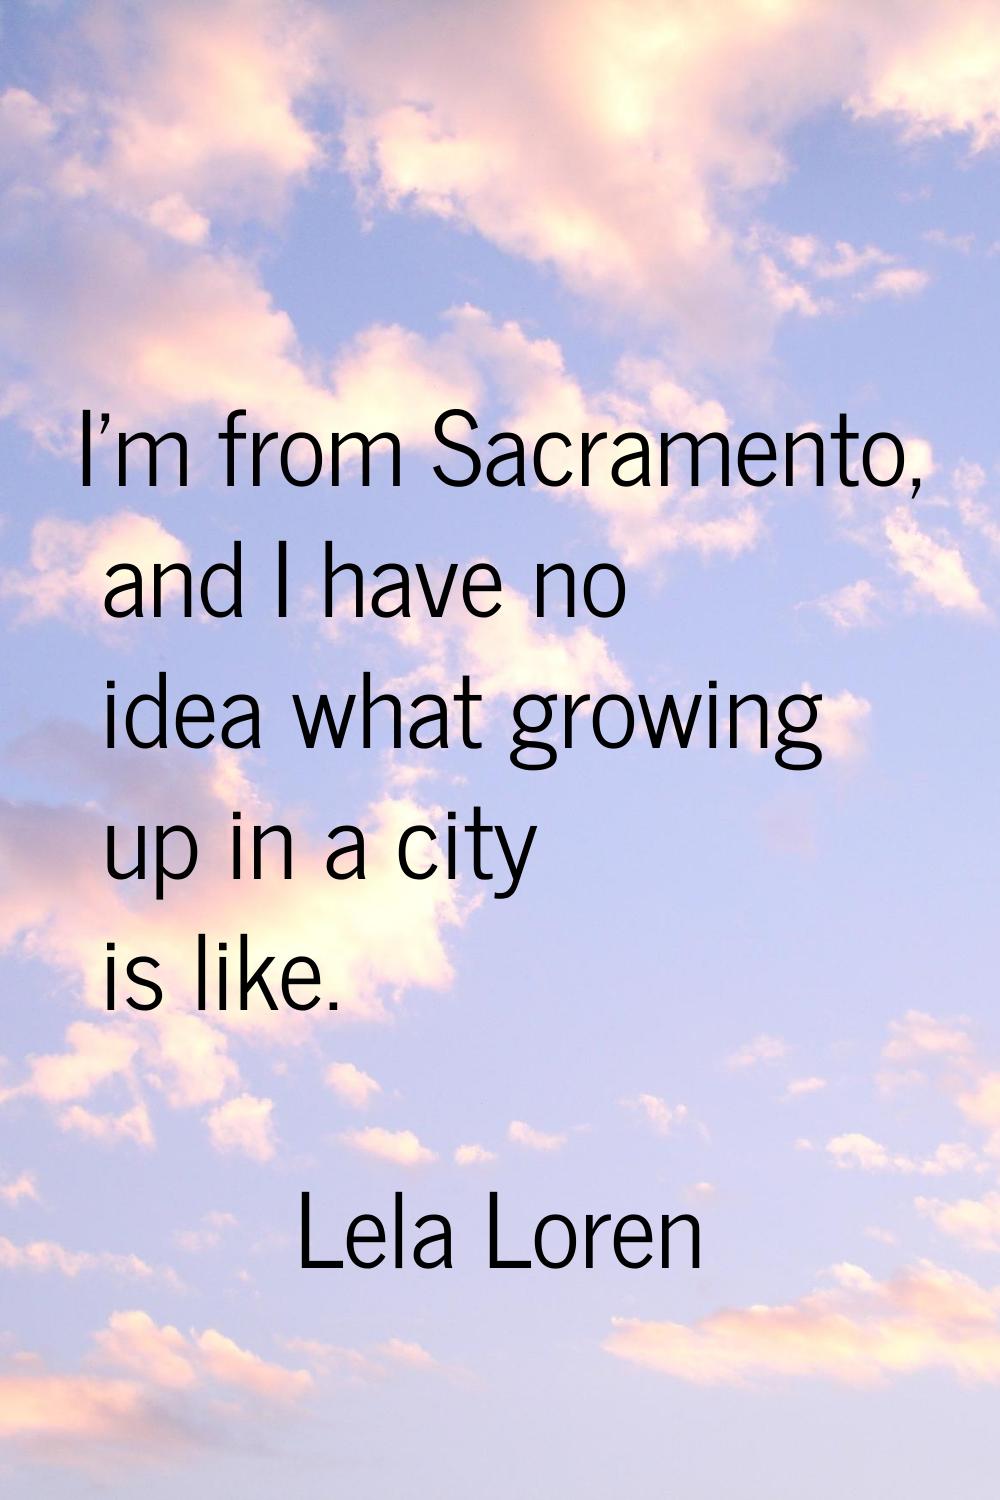 I'm from Sacramento, and I have no idea what growing up in a city is like.